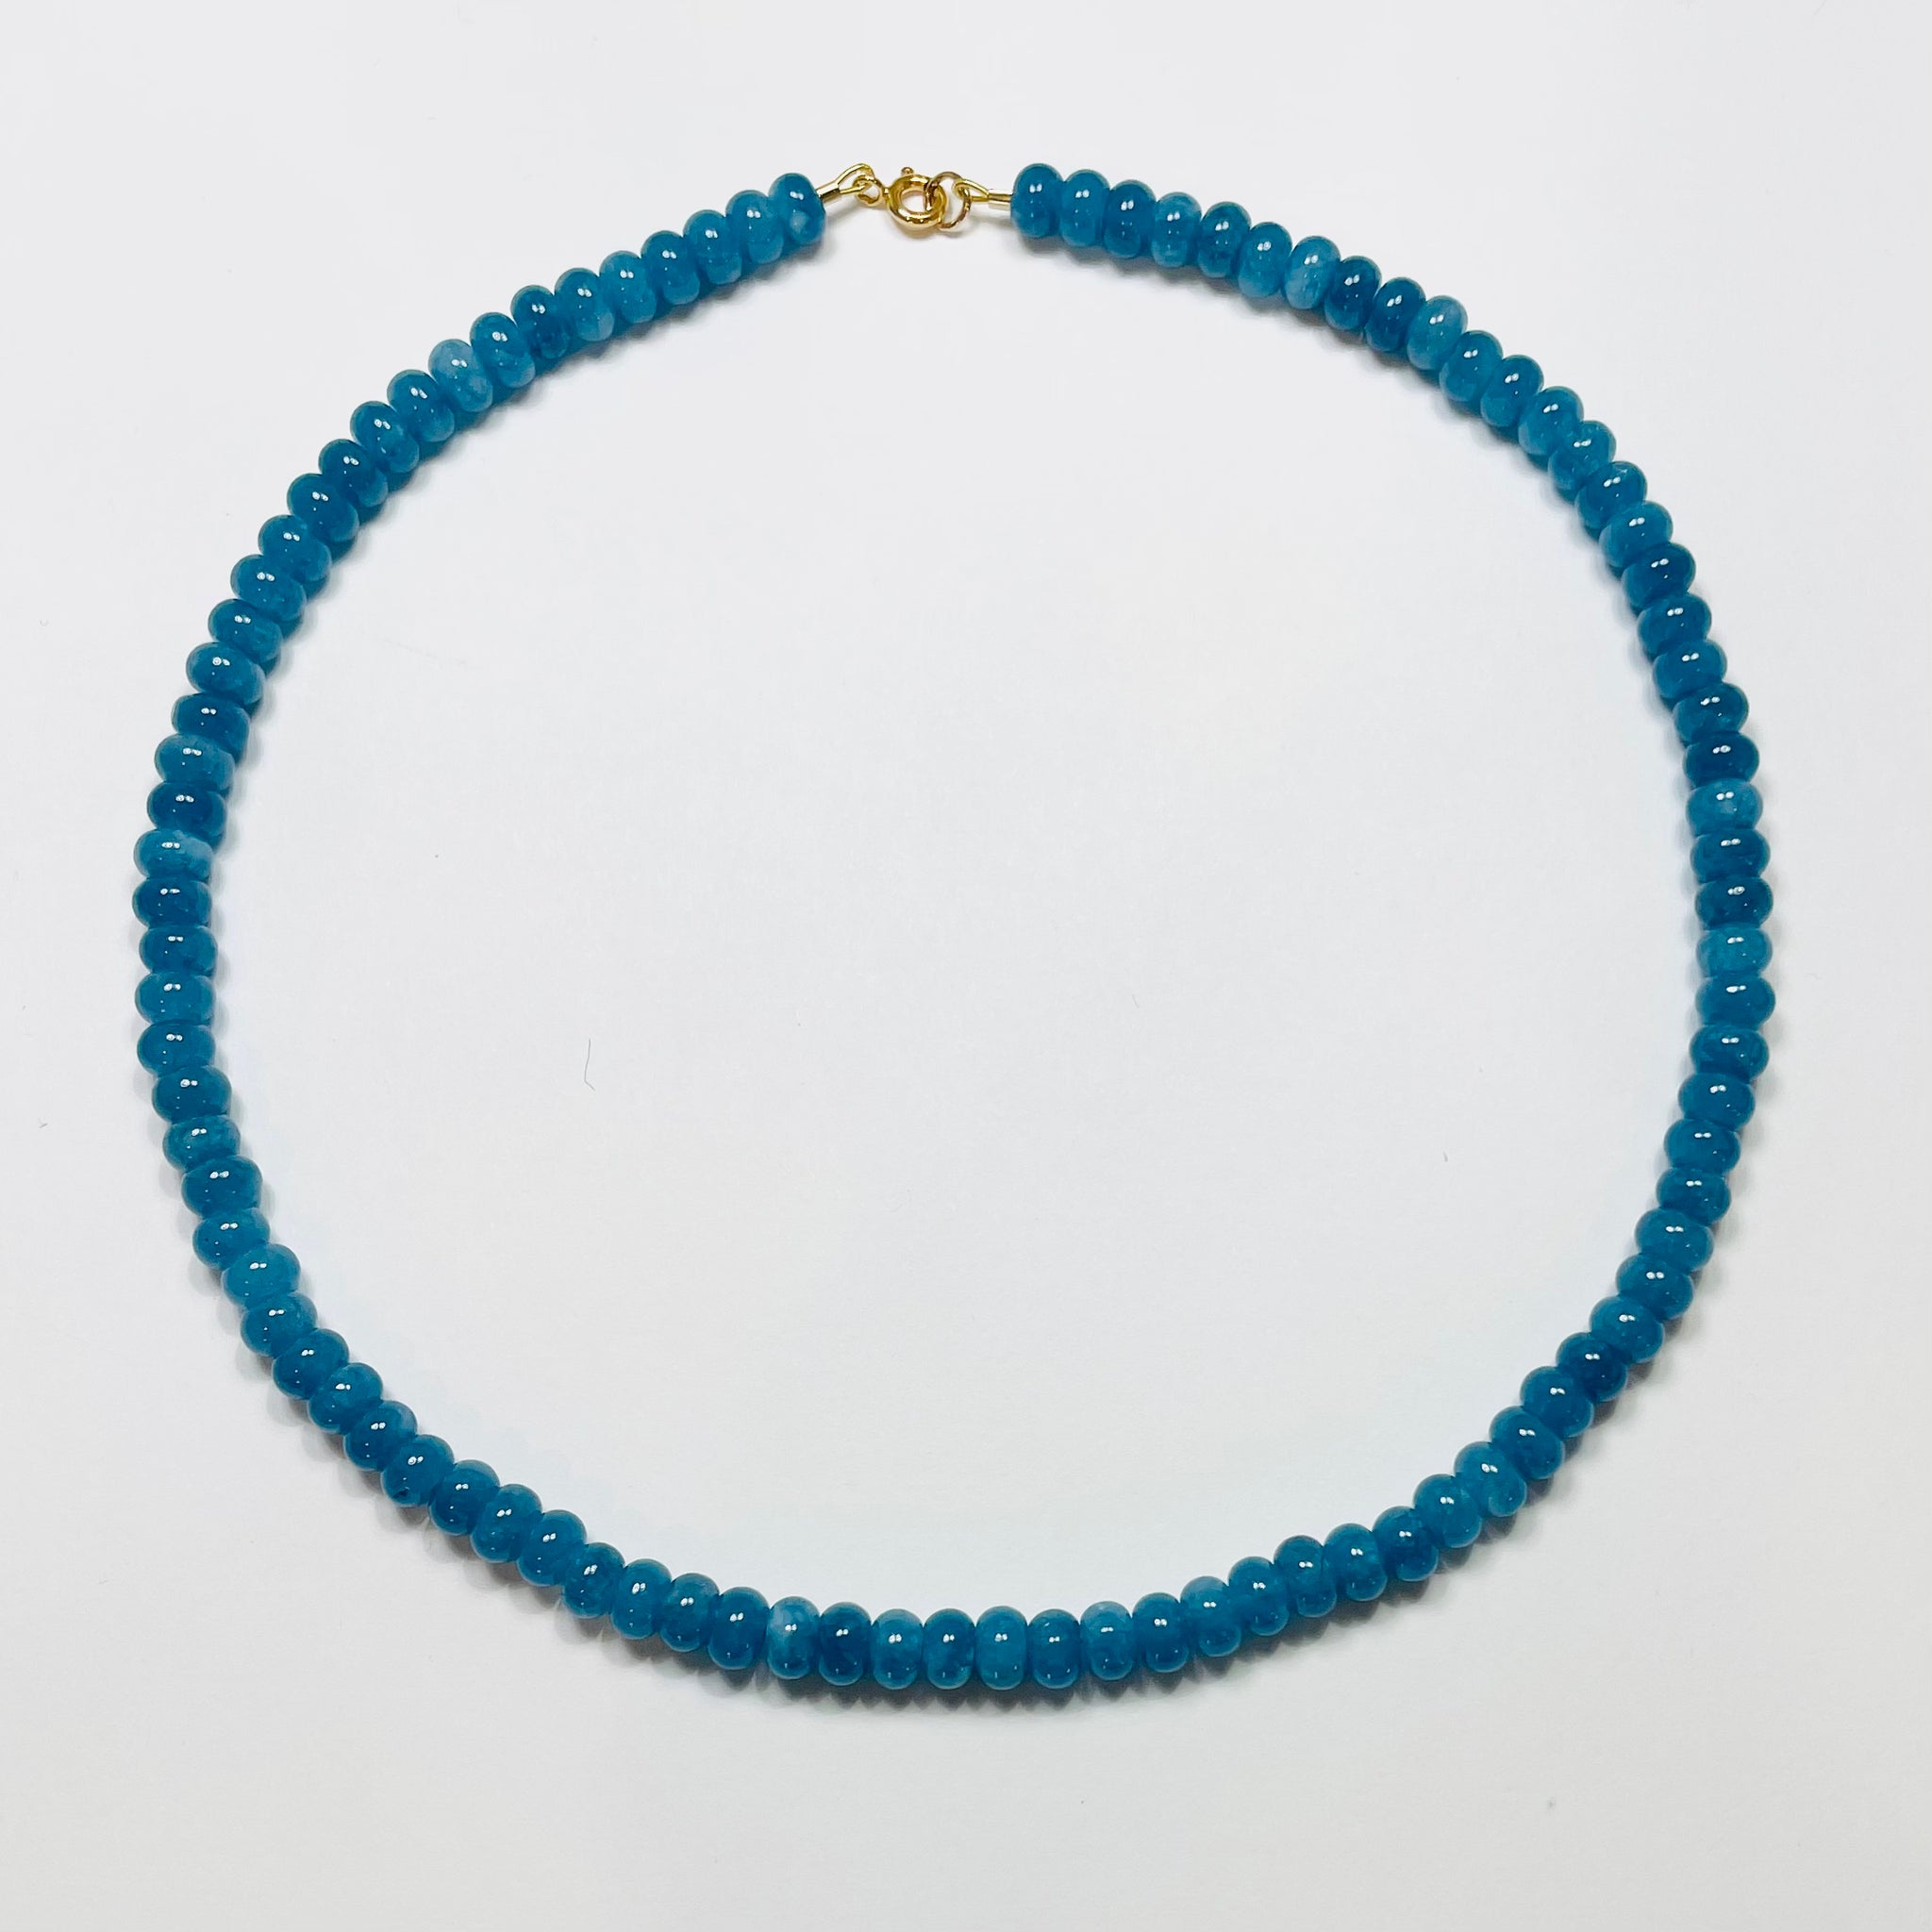 peacock blue angelite candy necklace, 5-6 mm